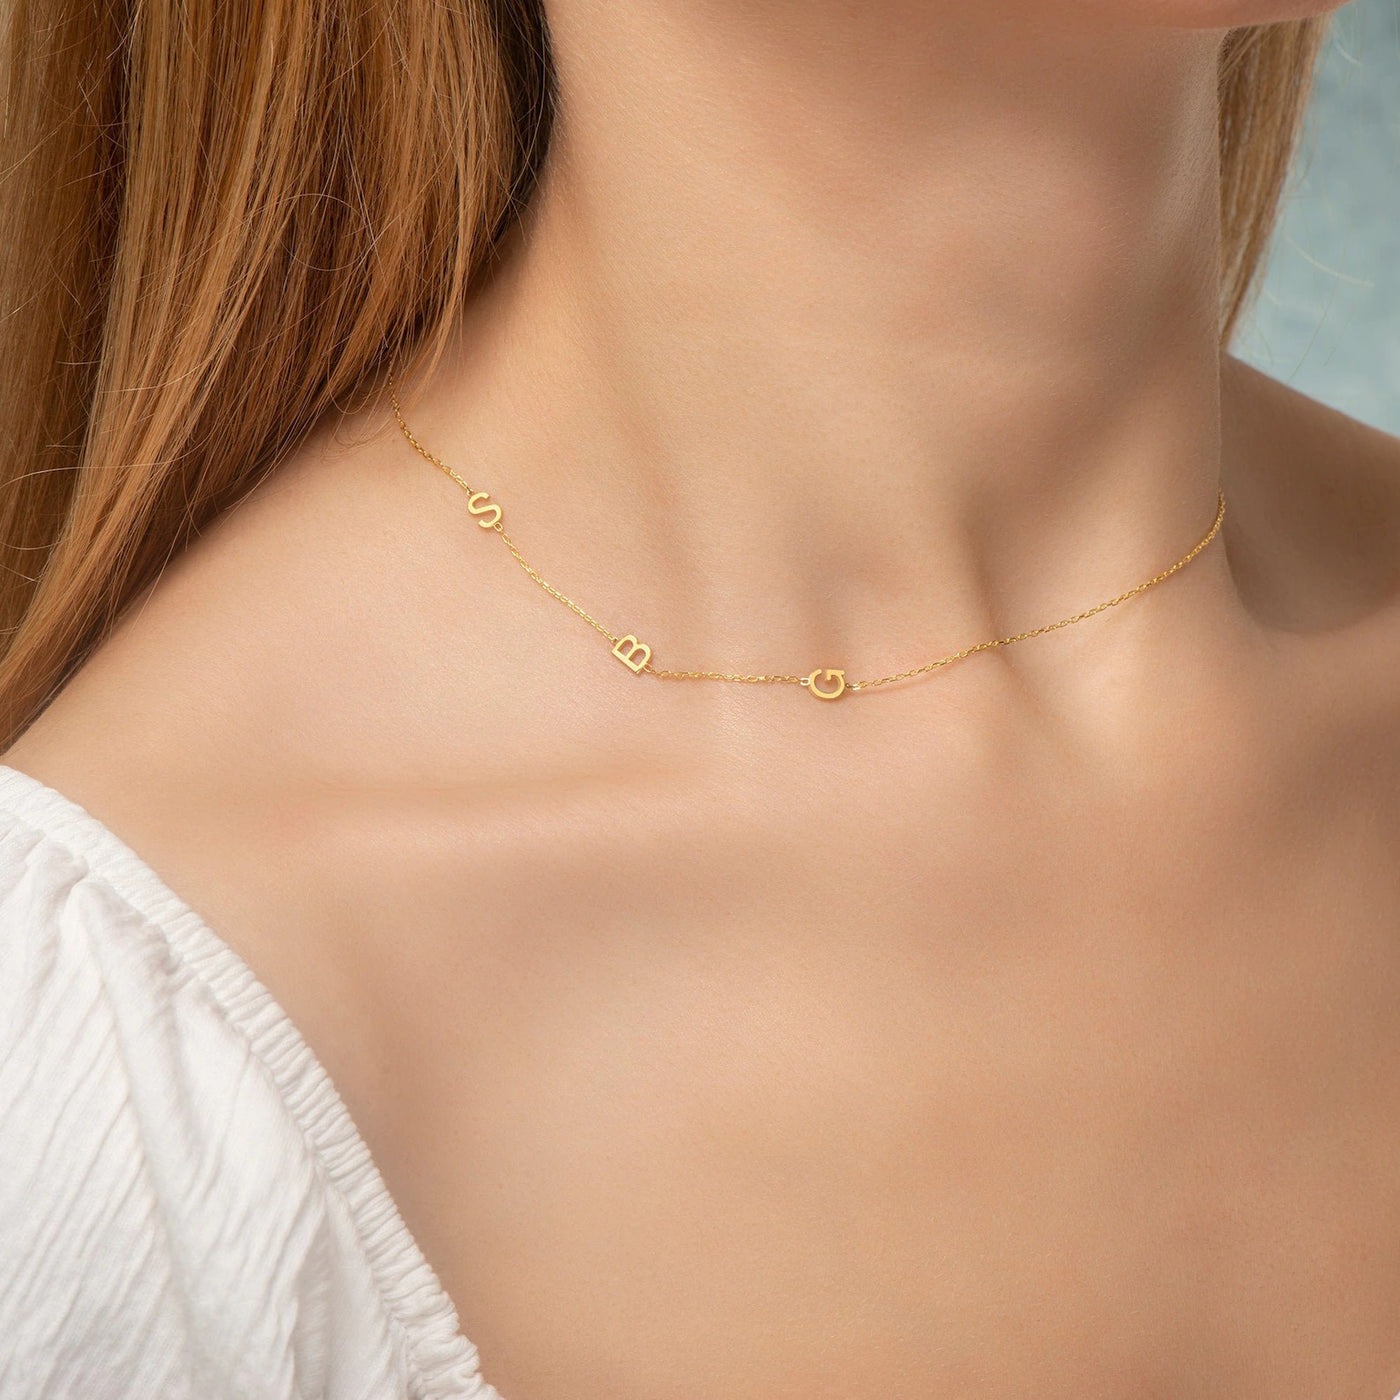 14k Gold Letter Necklace, Solid Gold Initial Necklace, Letter Necklace, Sideways  Necklace, Tiny Letter Necklace, Dainty Letter Necklace - Etsy